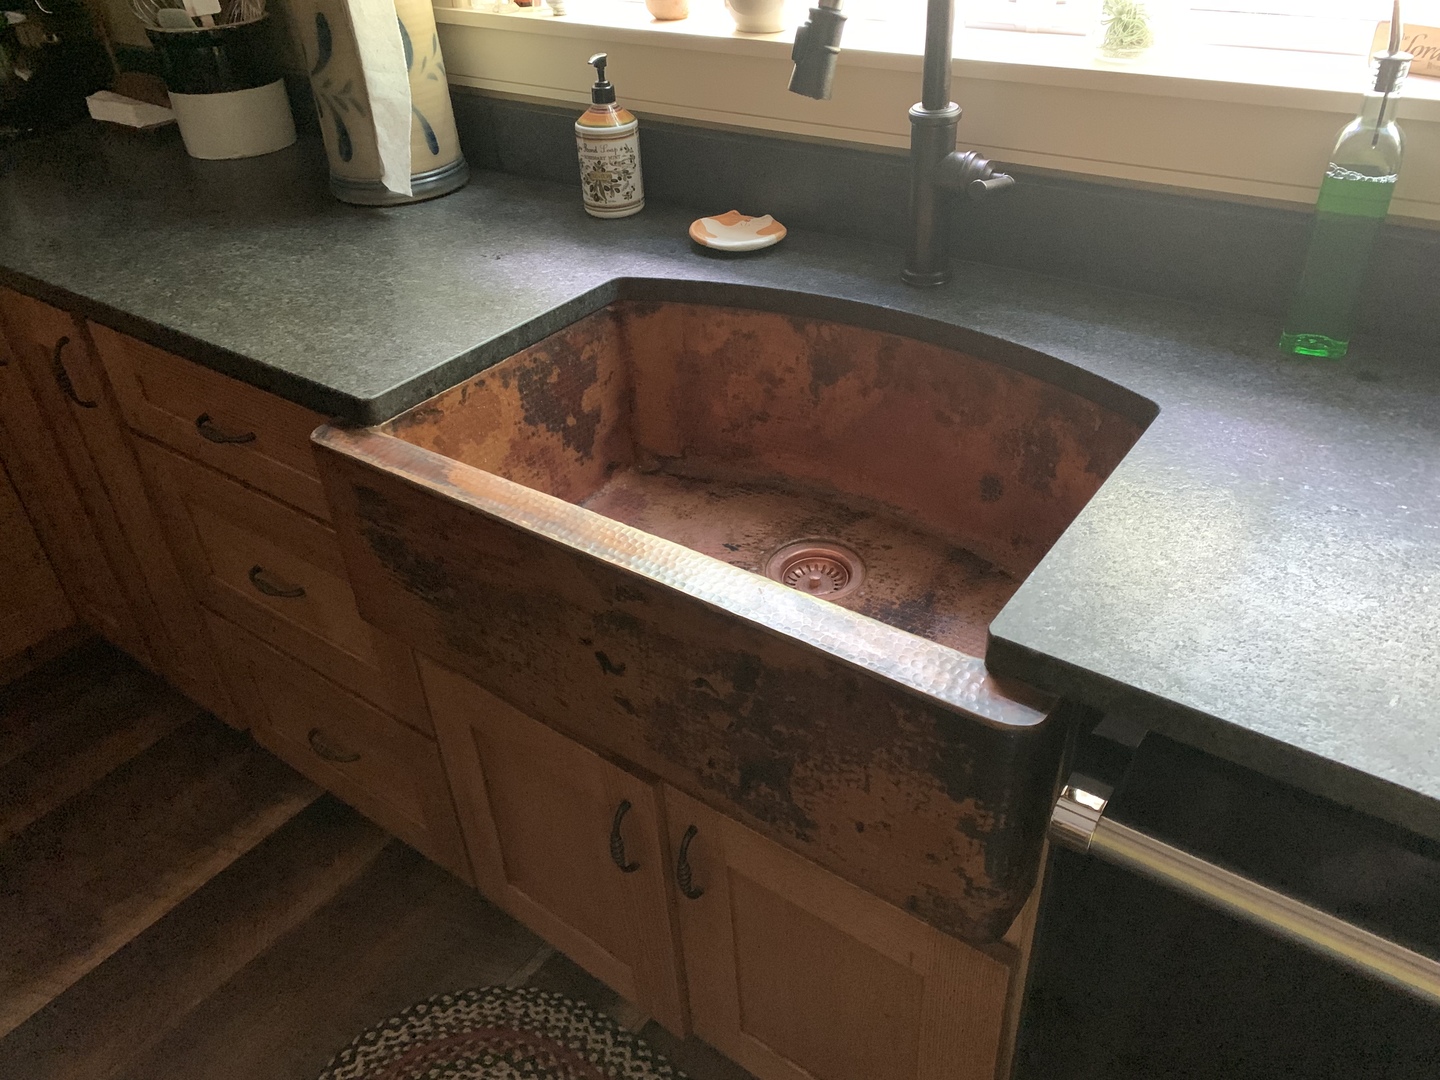 Copper apron sink with dark countertop and window World CopperSmith